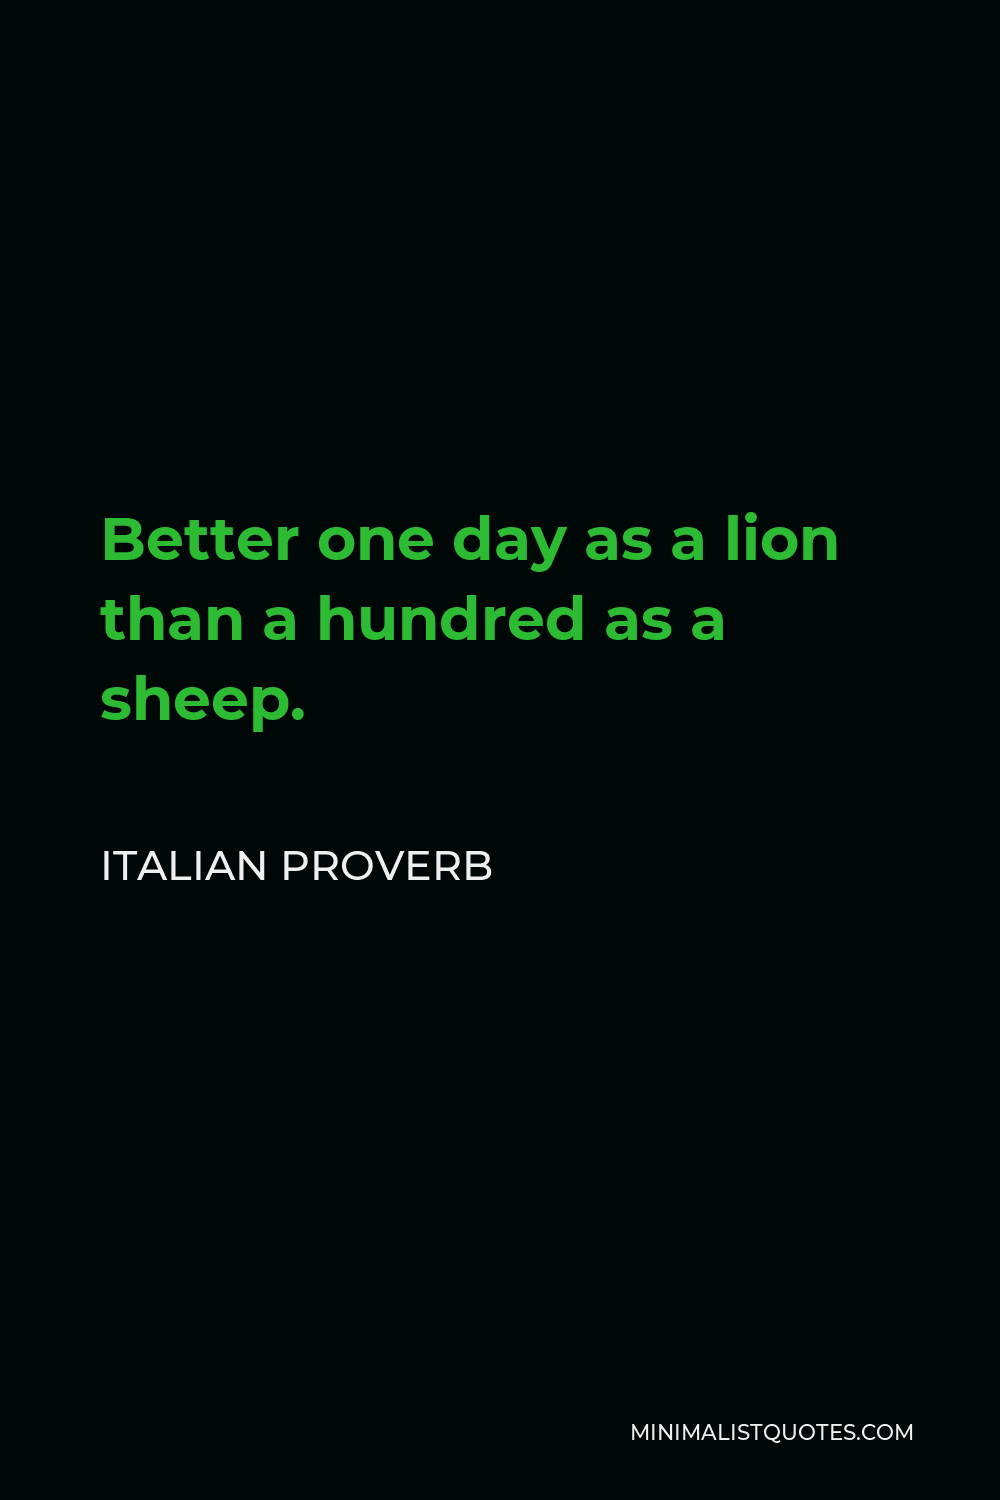 Italian Proverb Quote - Better one day as a lion than a hundred as a sheep.